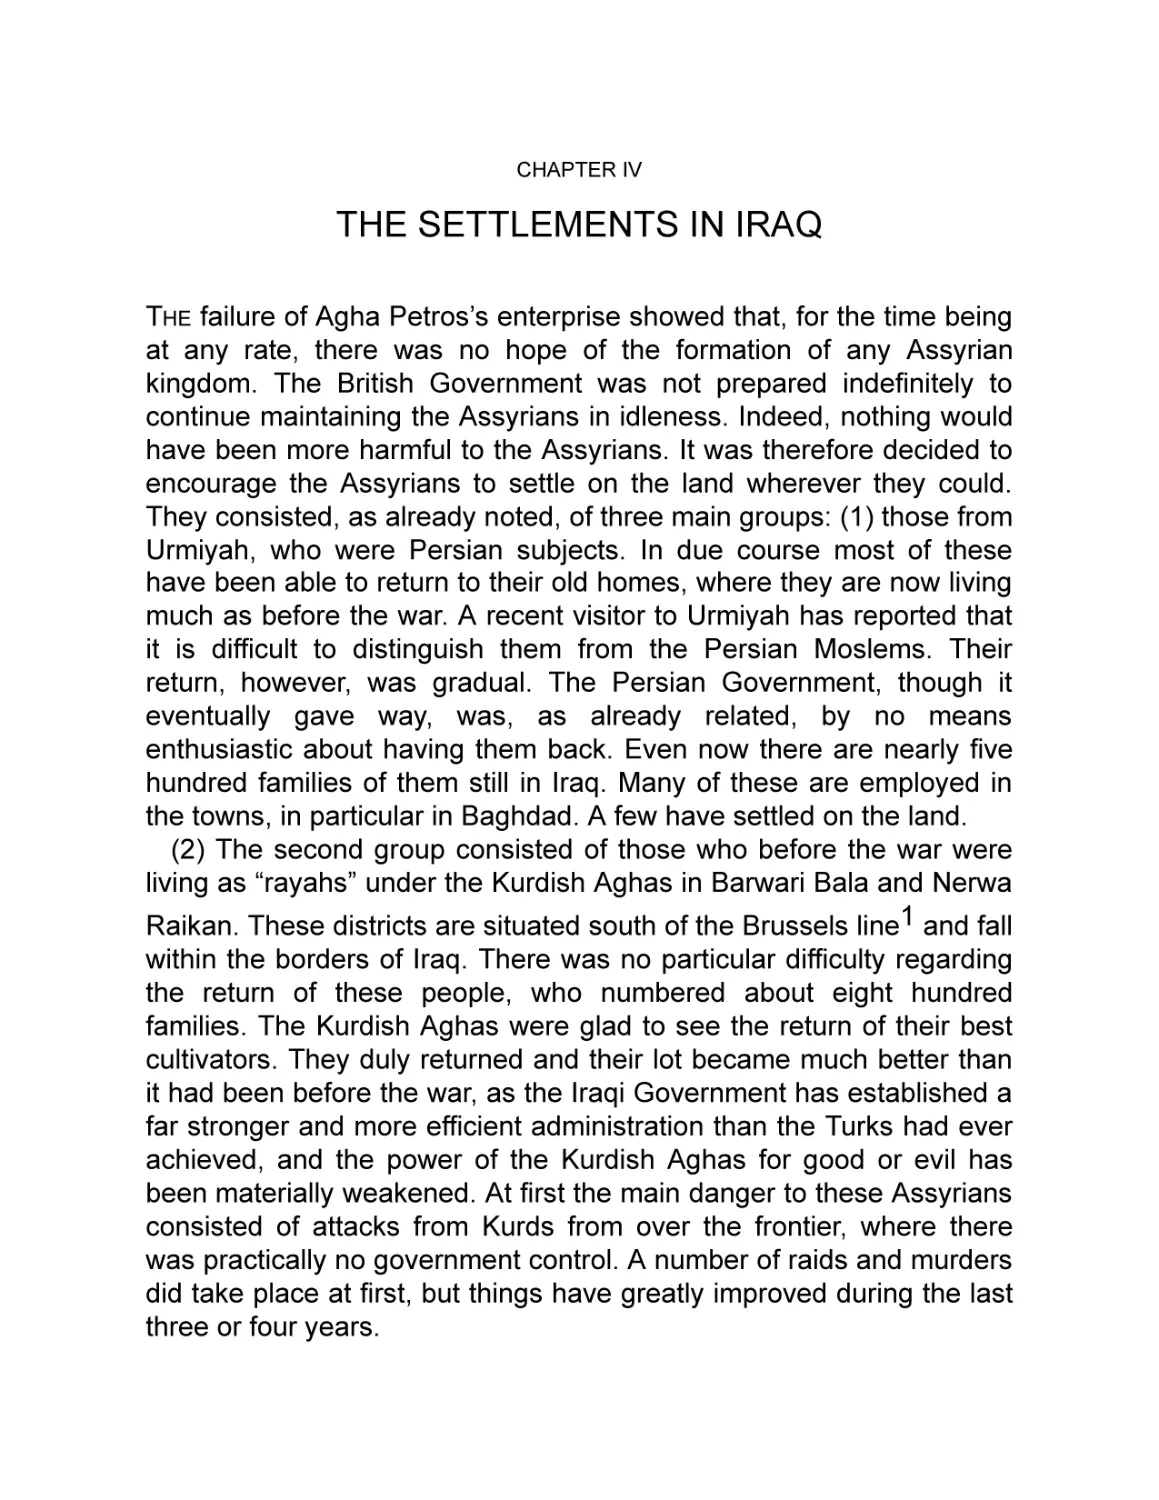 IV The Settlements in Iraq